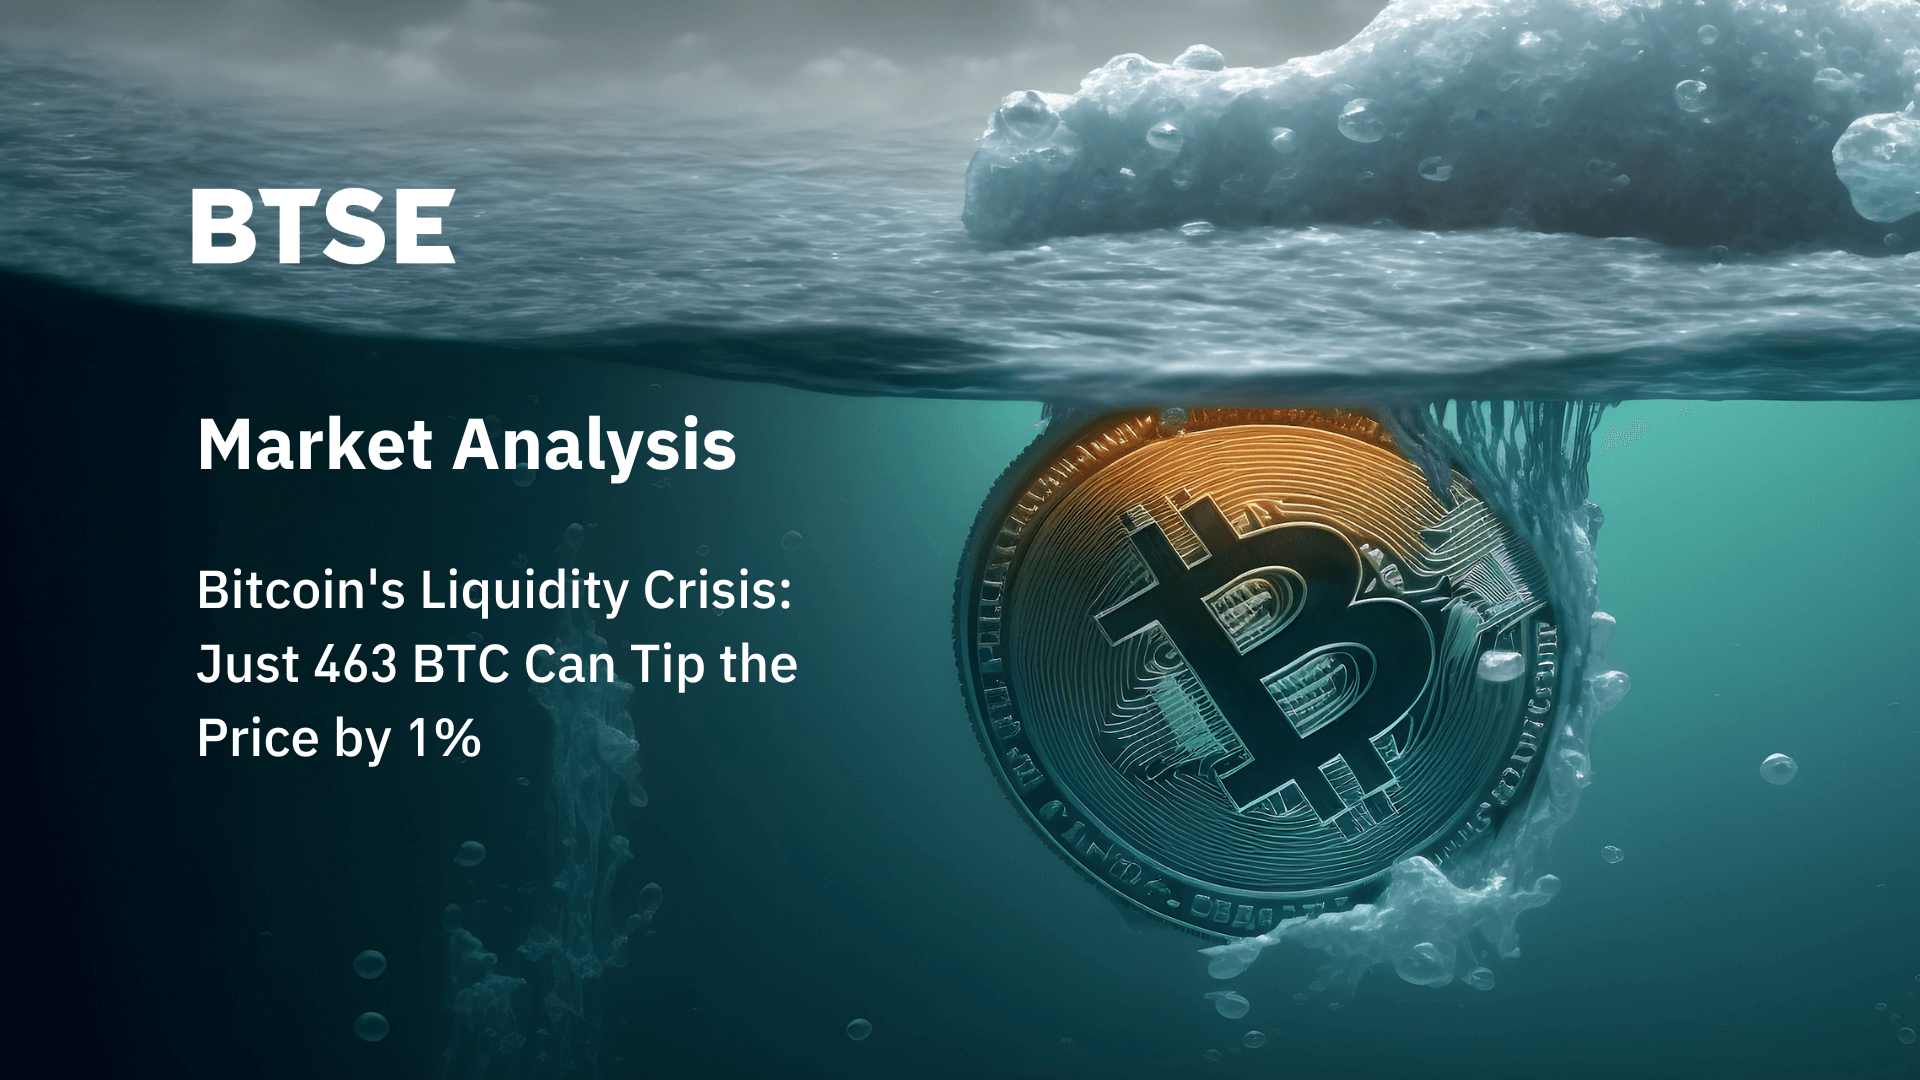 Bitcoin's Liquidity Crisis: Just 463 BTC Can Tip the Price by 1%